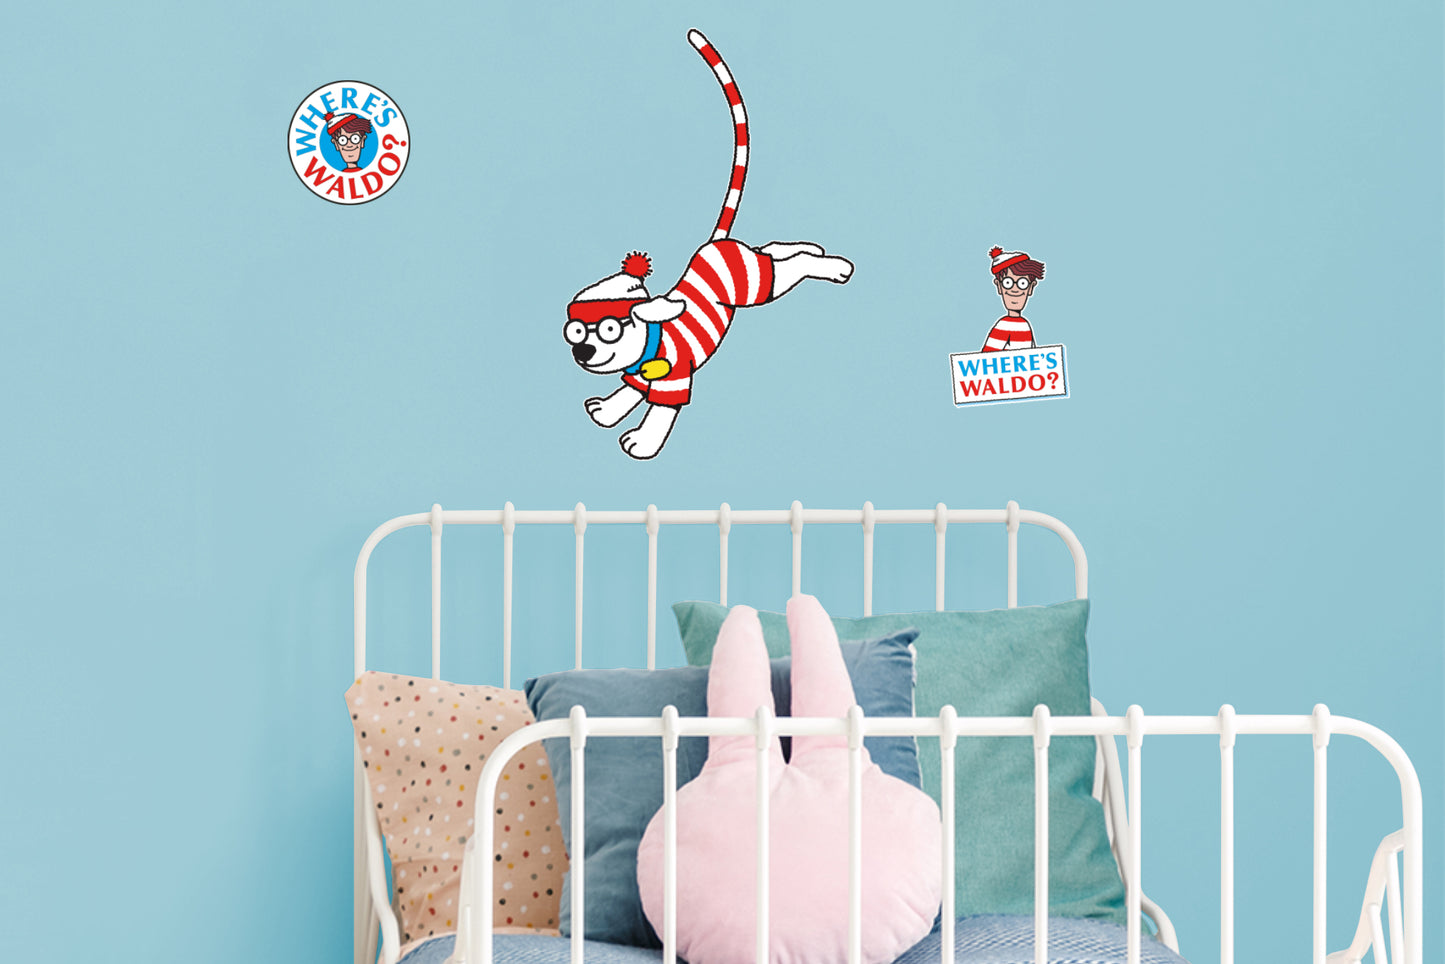 Where's Waldo: Woof RealBig - Officially Licensed NBC Universal Removable Adhesive Decal